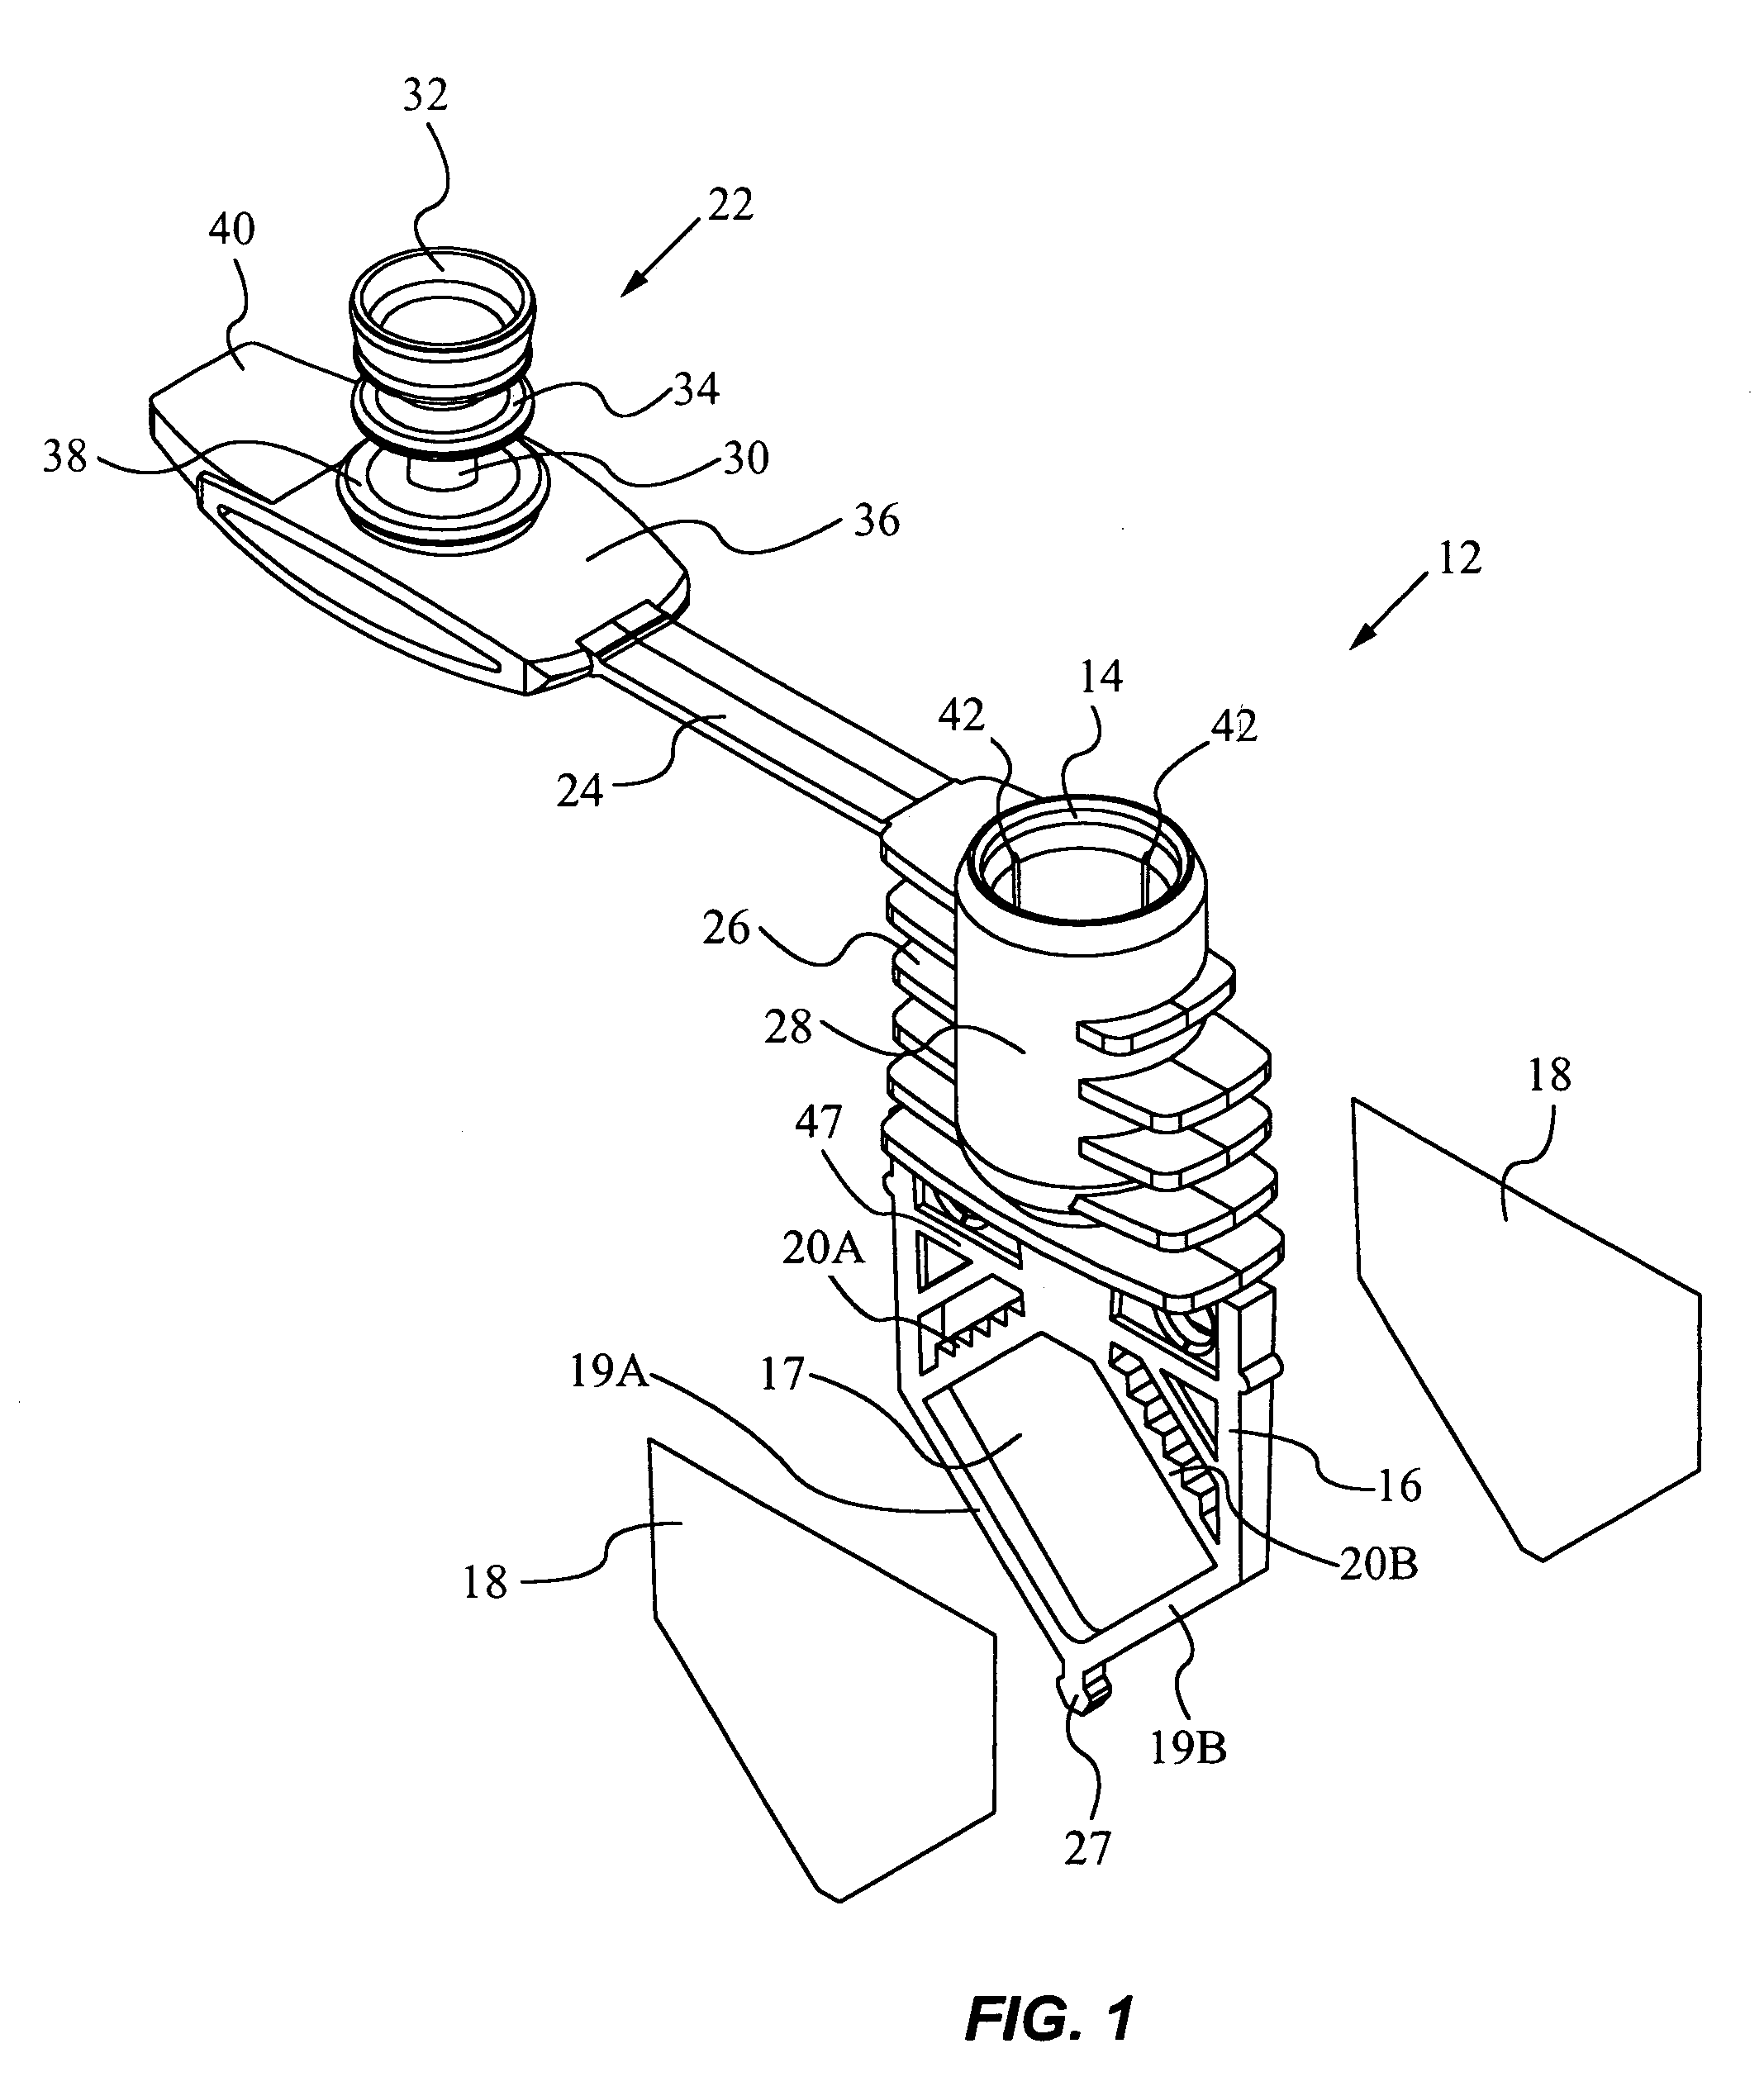 Apparatus for performing heat-exchanging chemical reactions